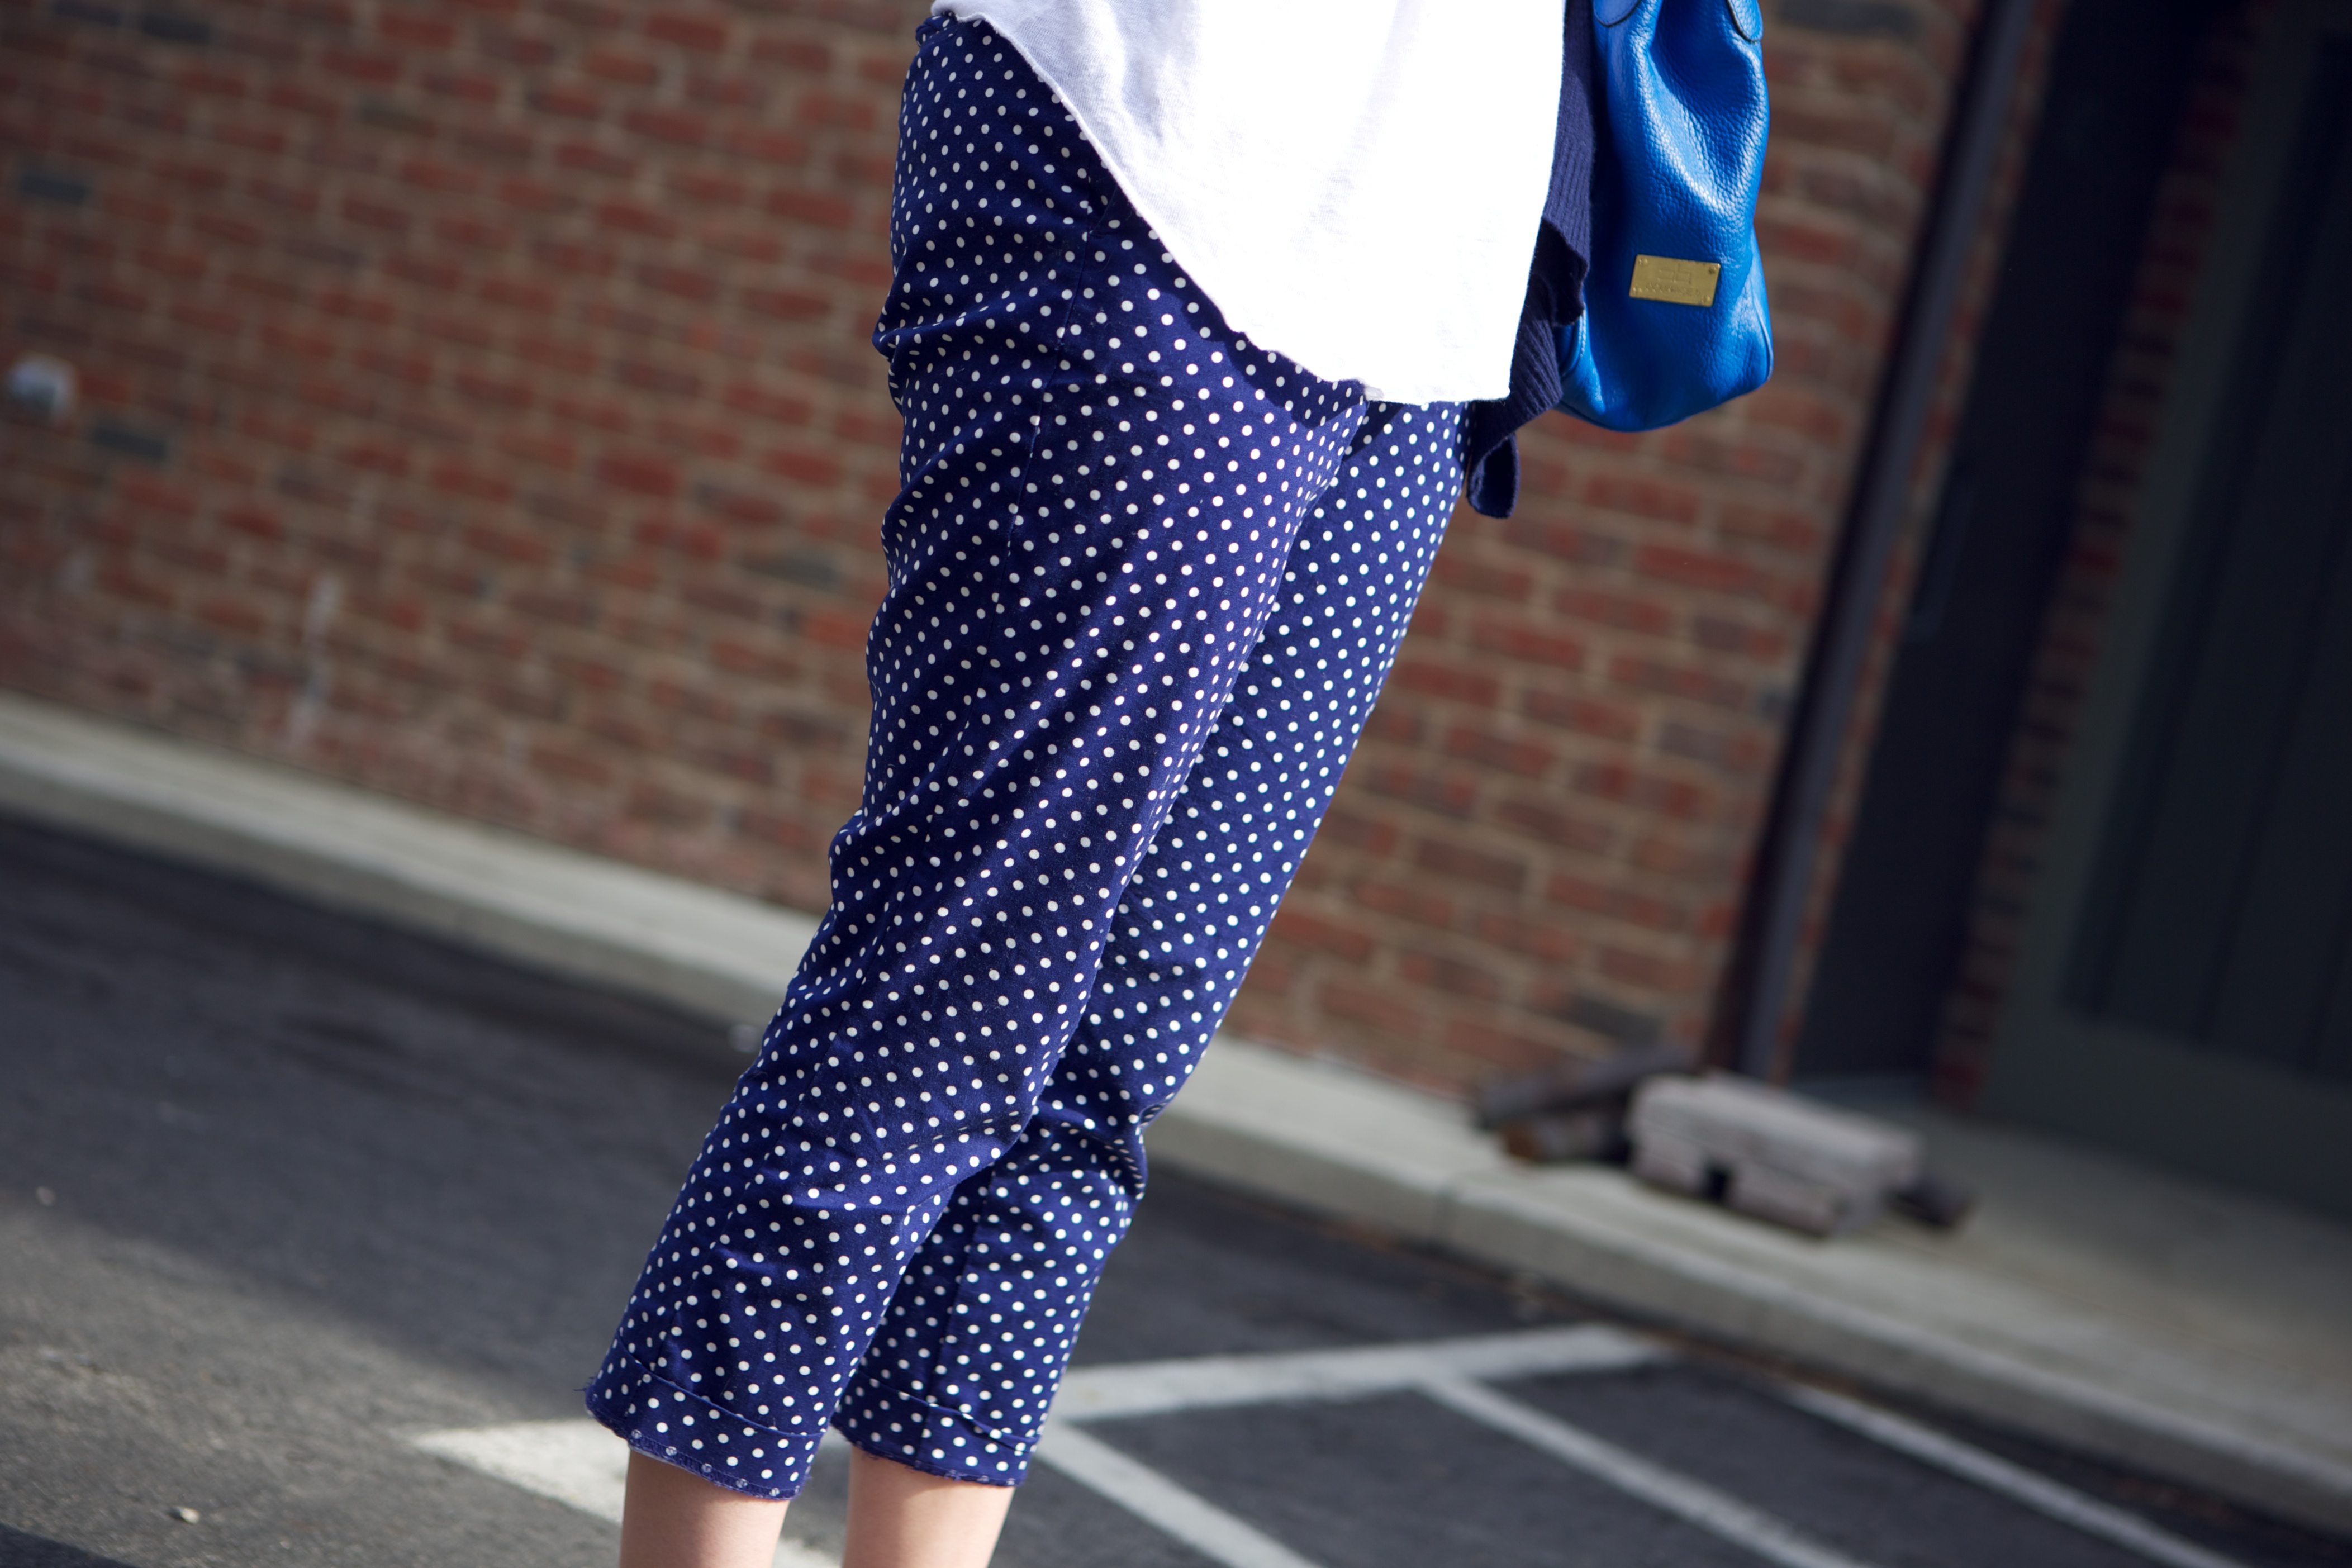 polka dot trousers outfit